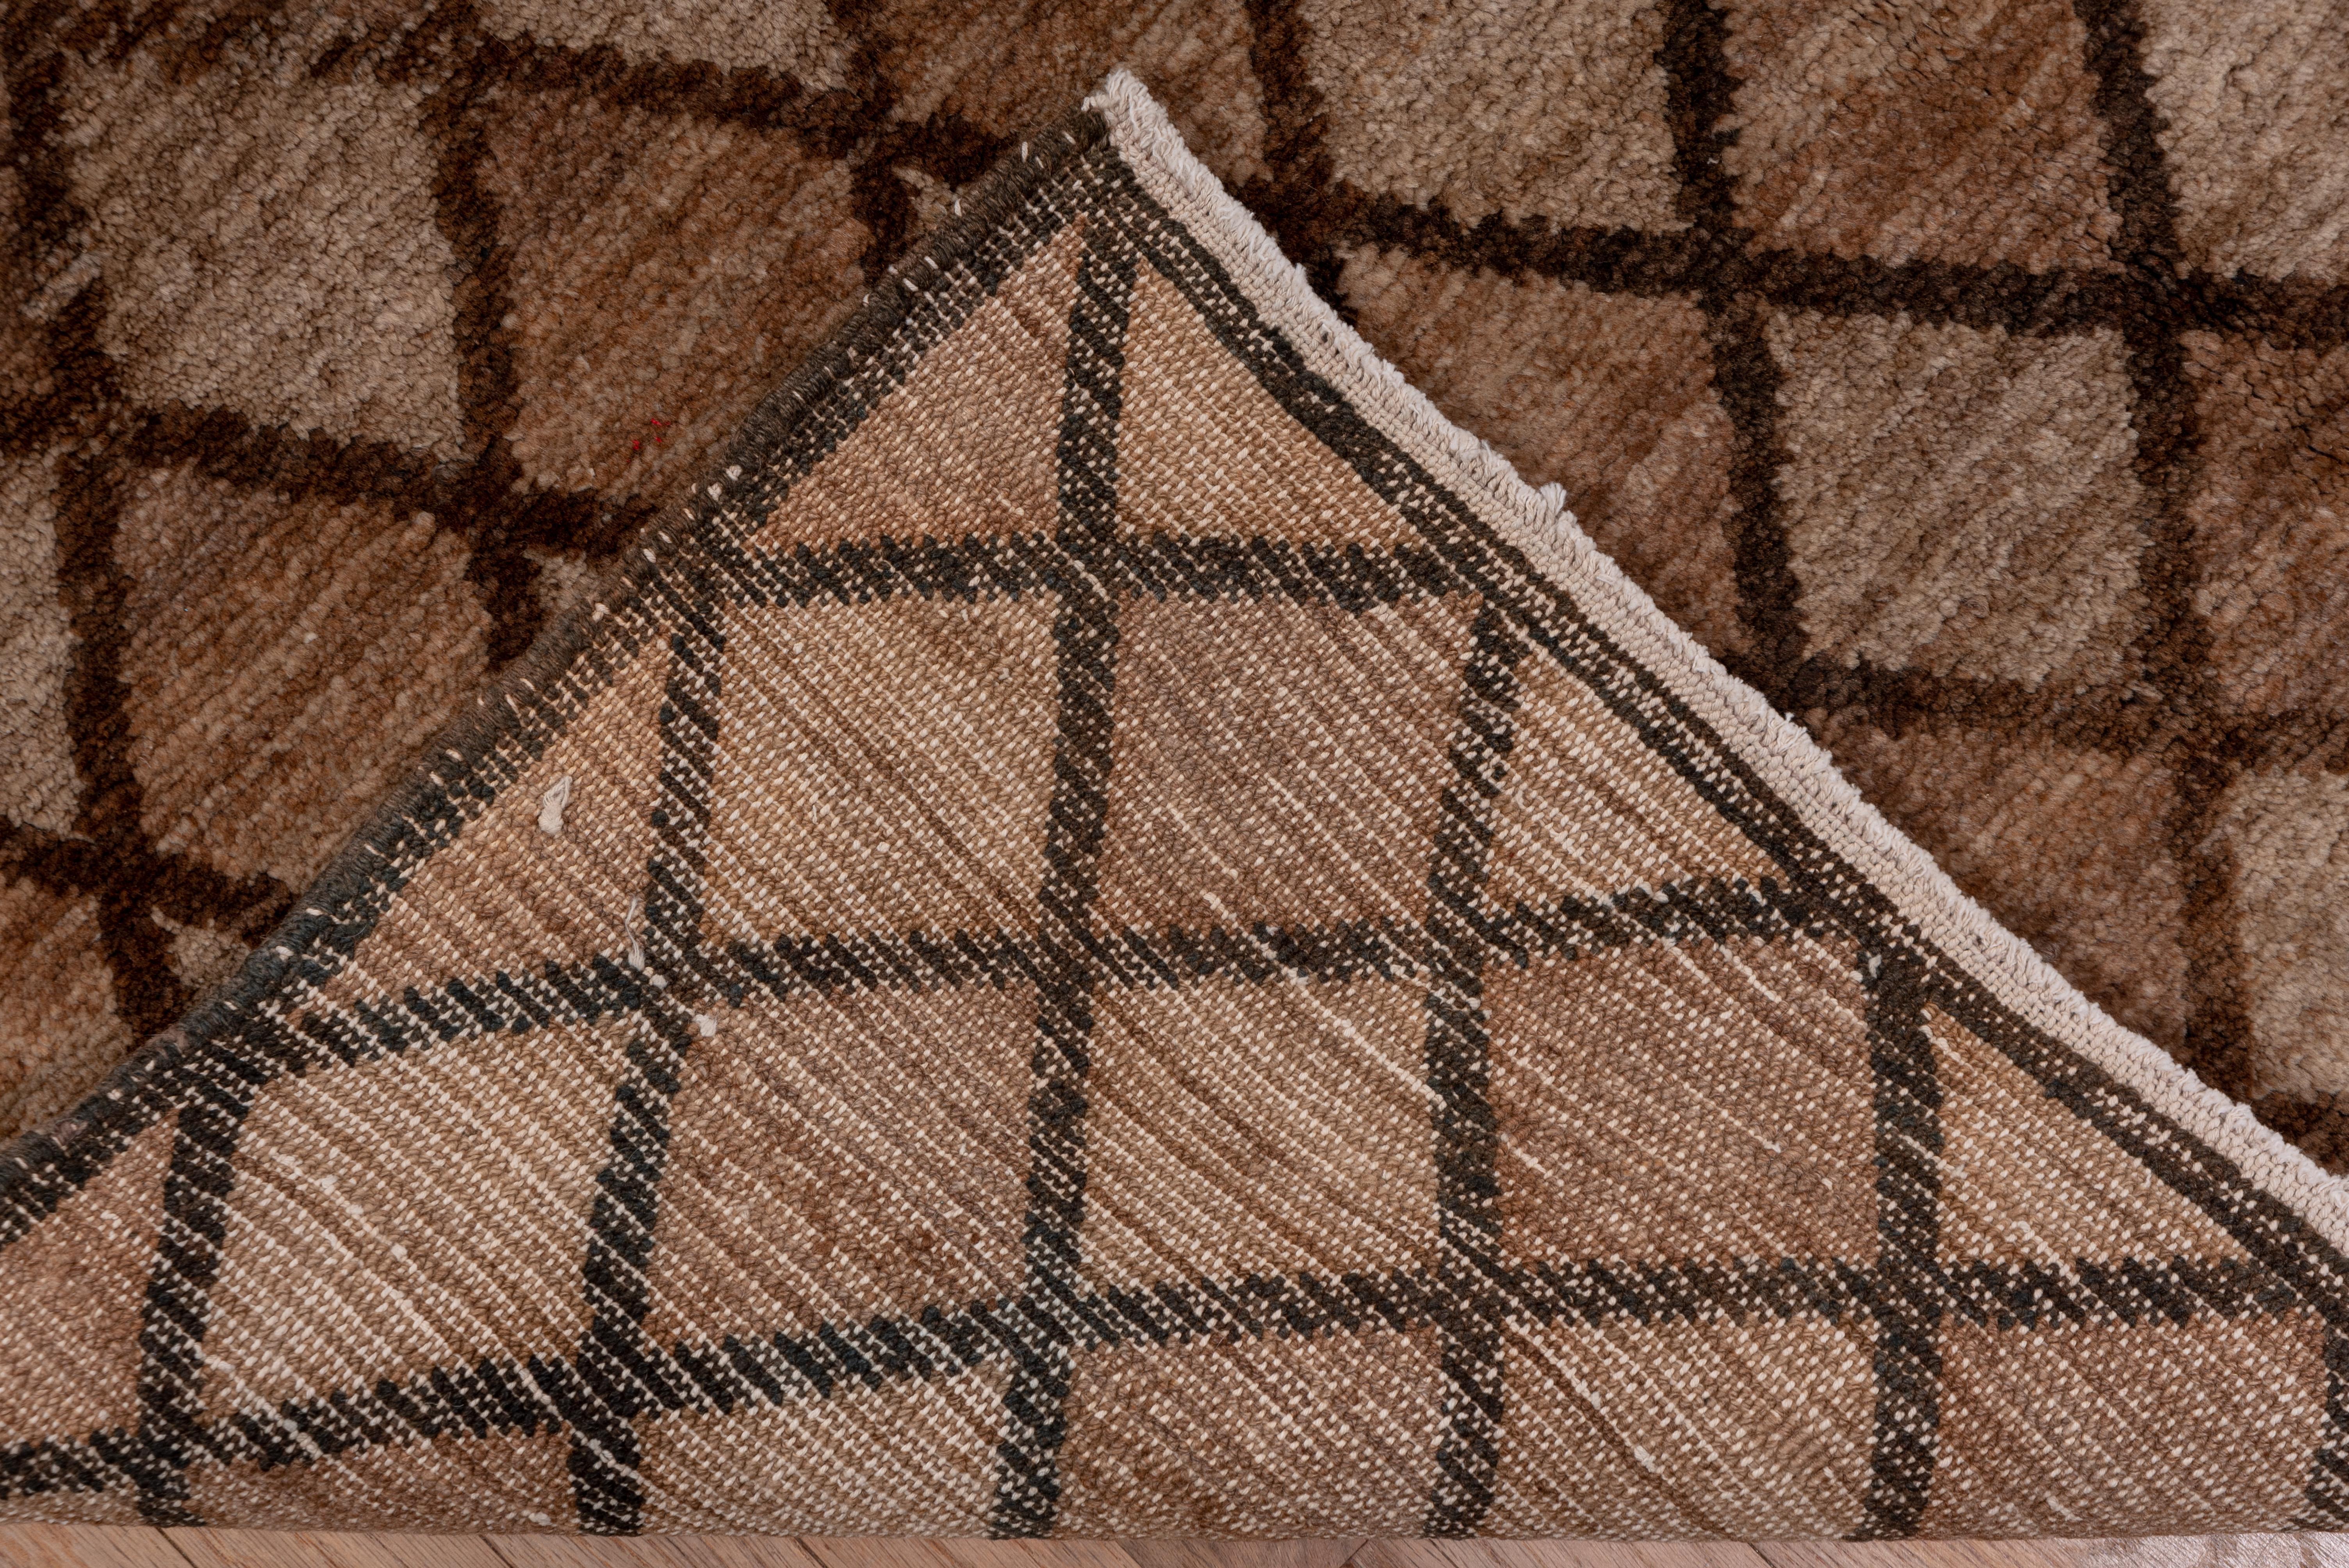 This vintage East Anatolian longish carpet shows a total lozenge pattern in shades of ecru-tan and abrashed light brown in a brick lattice, with no borders. Abrash lines show the rustic origins. This was not a factory carpet, but a real village